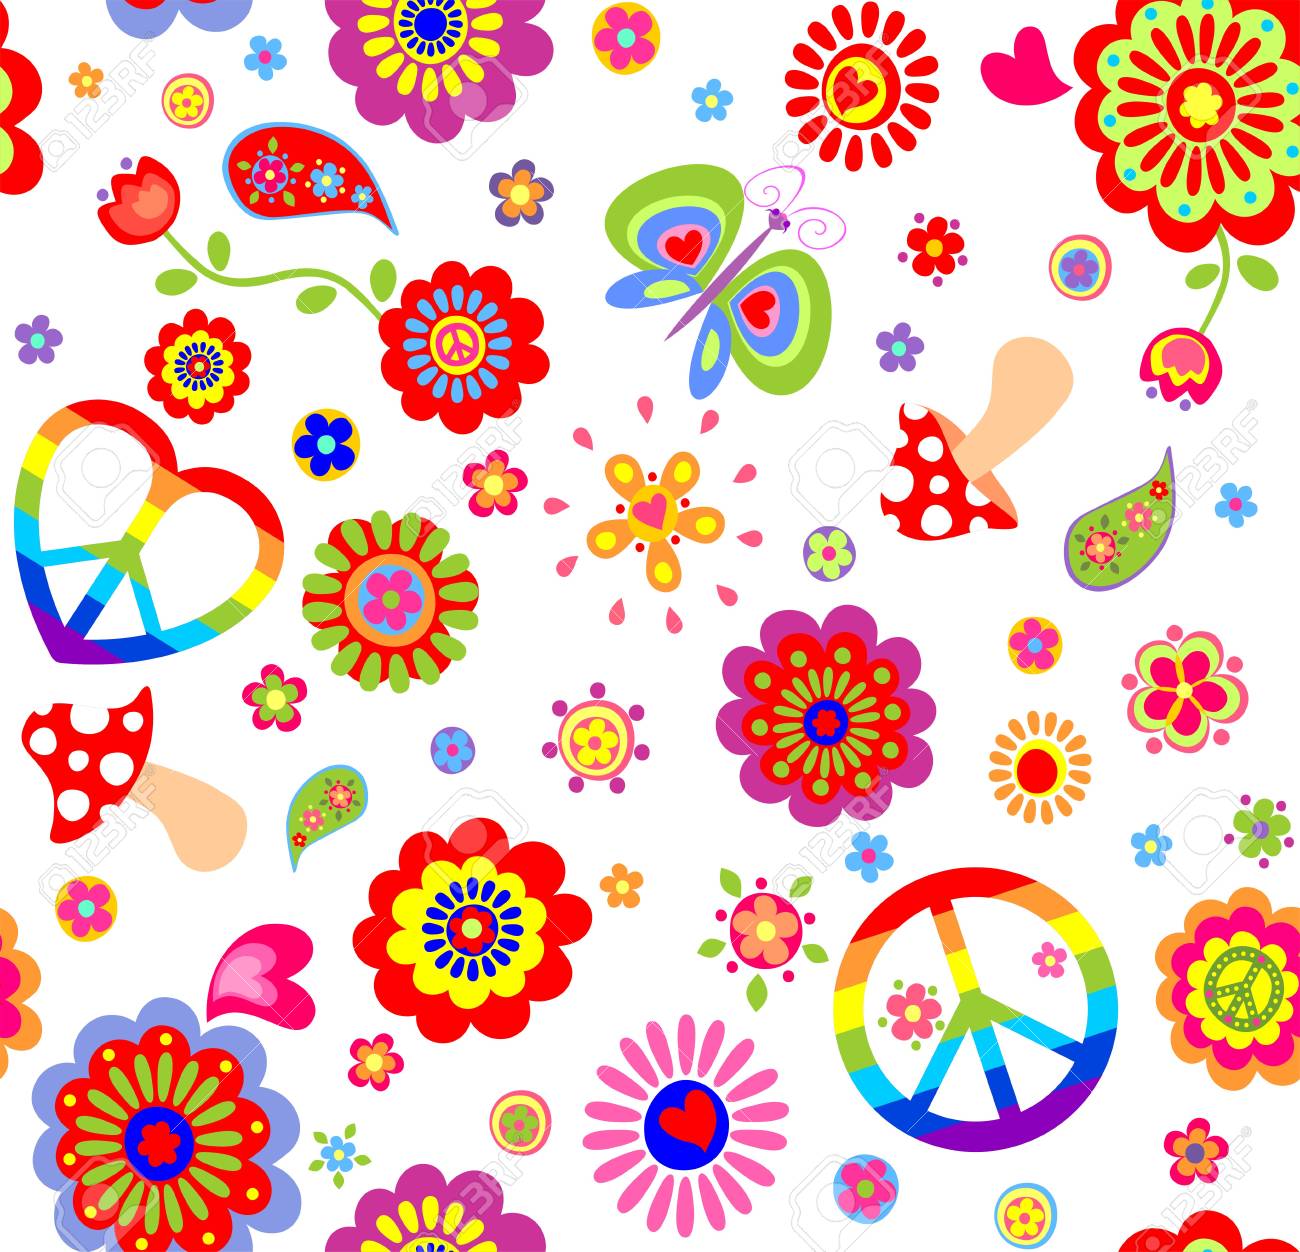 Childish Wallpaper With Colorful Hippie Peace Symbol Butterfly